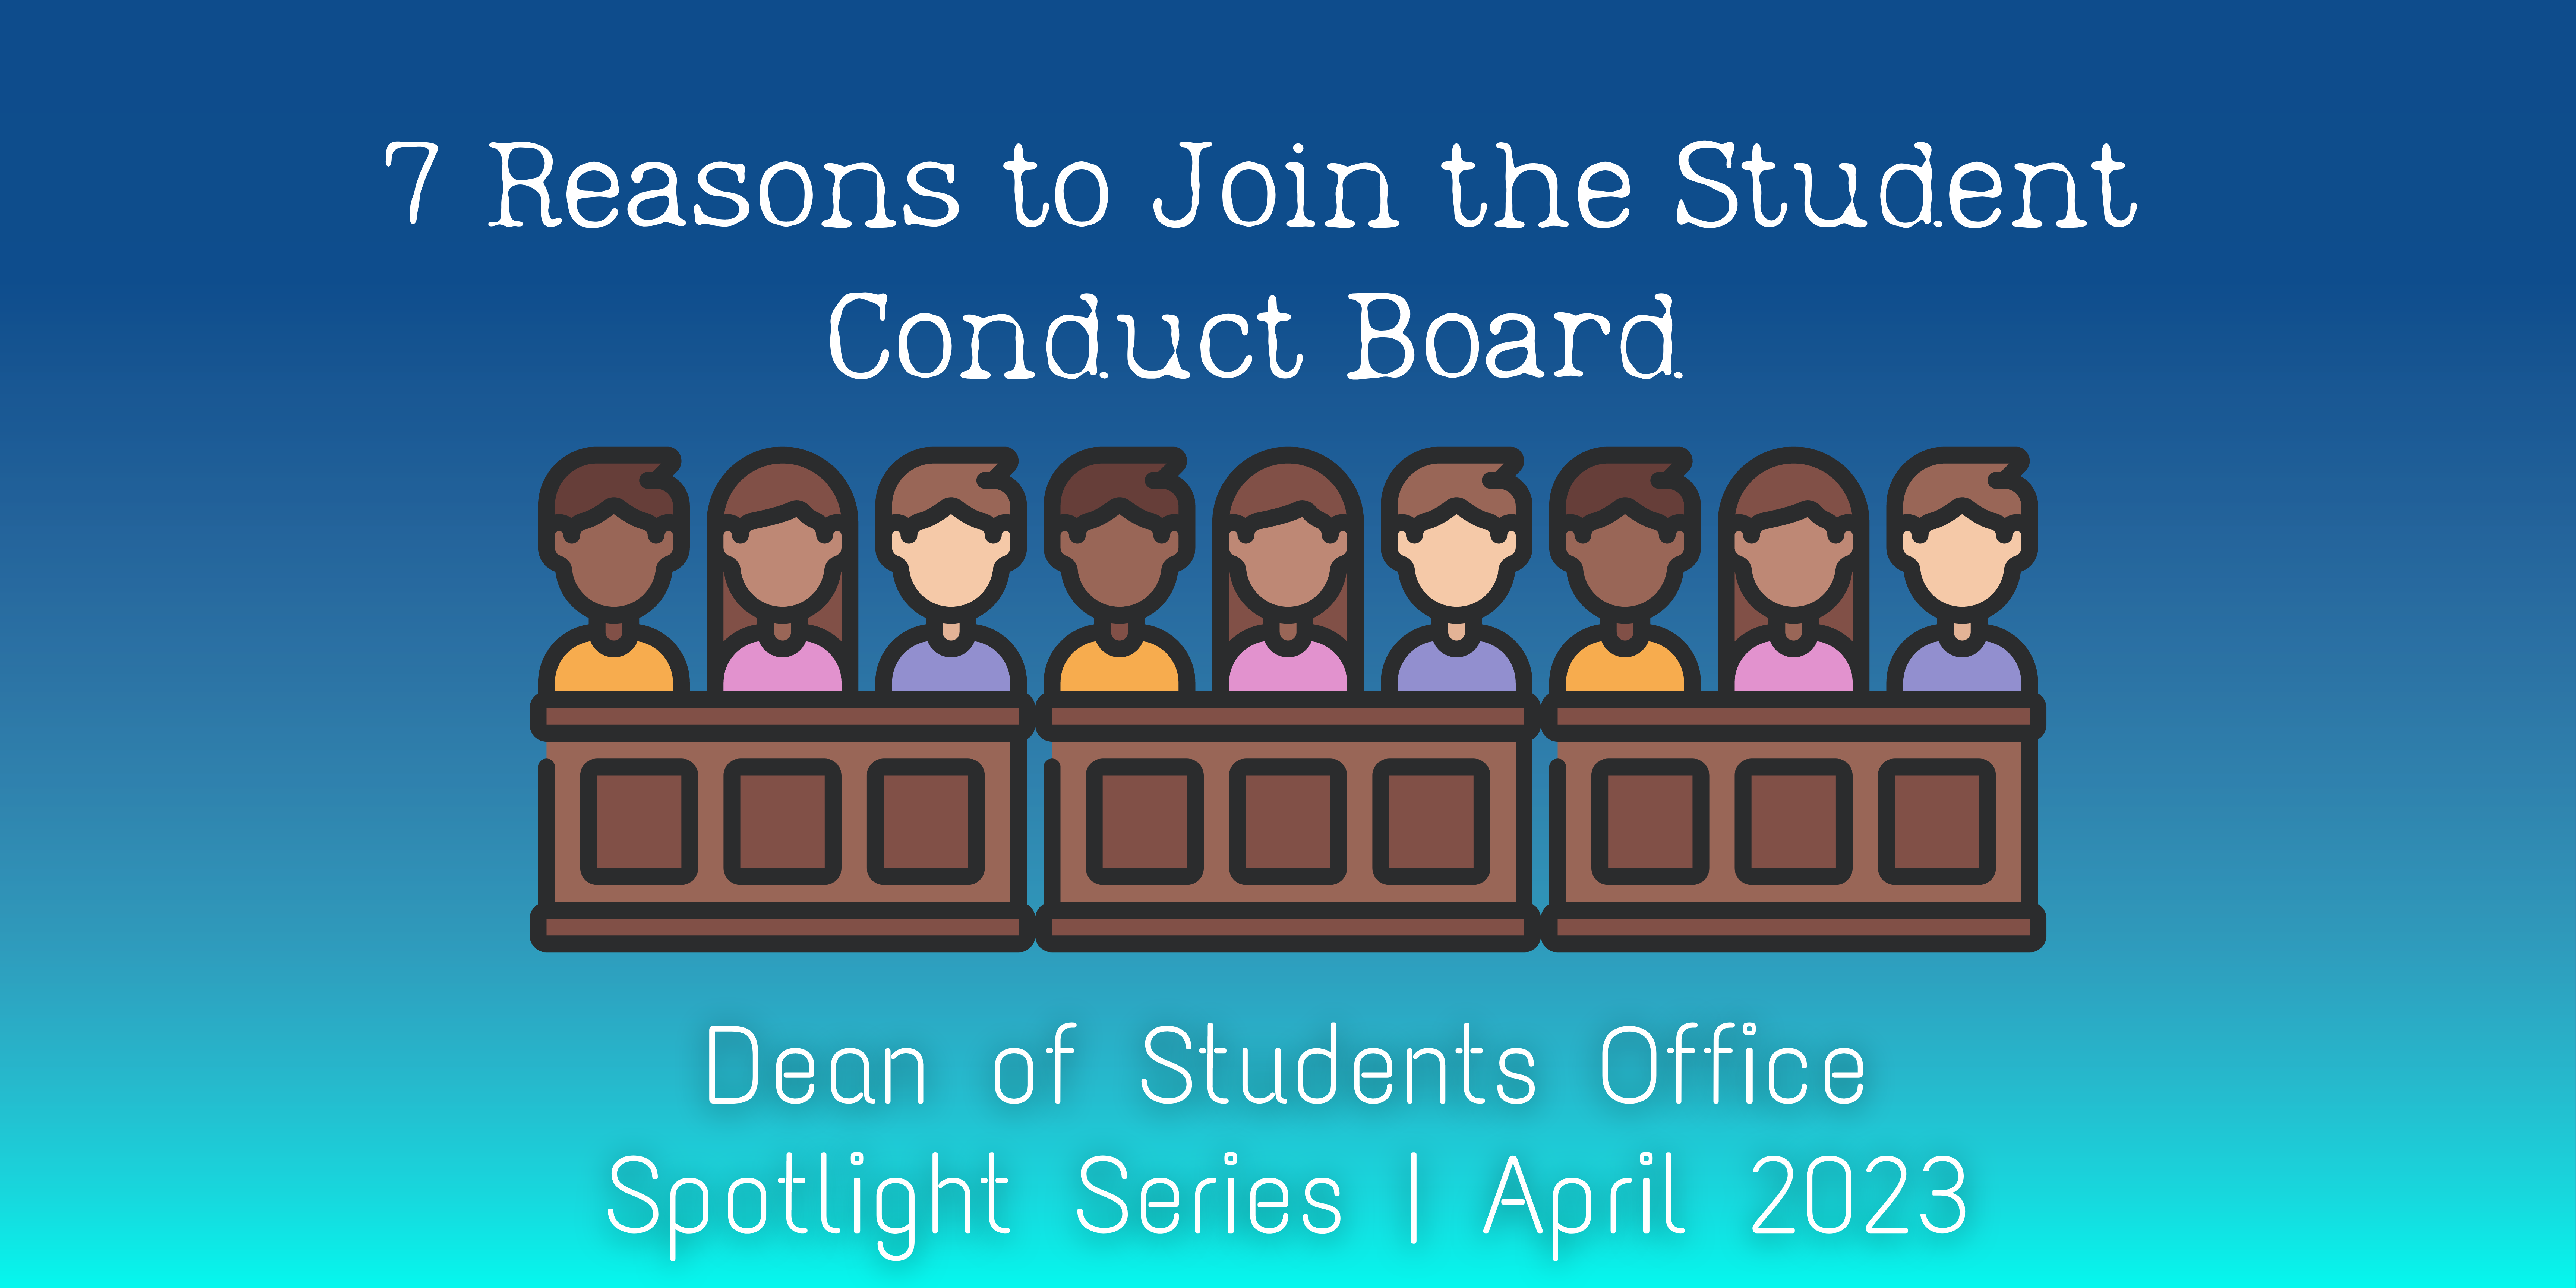 7 Reasons to Join the Student Conduct Board April 2023 banner